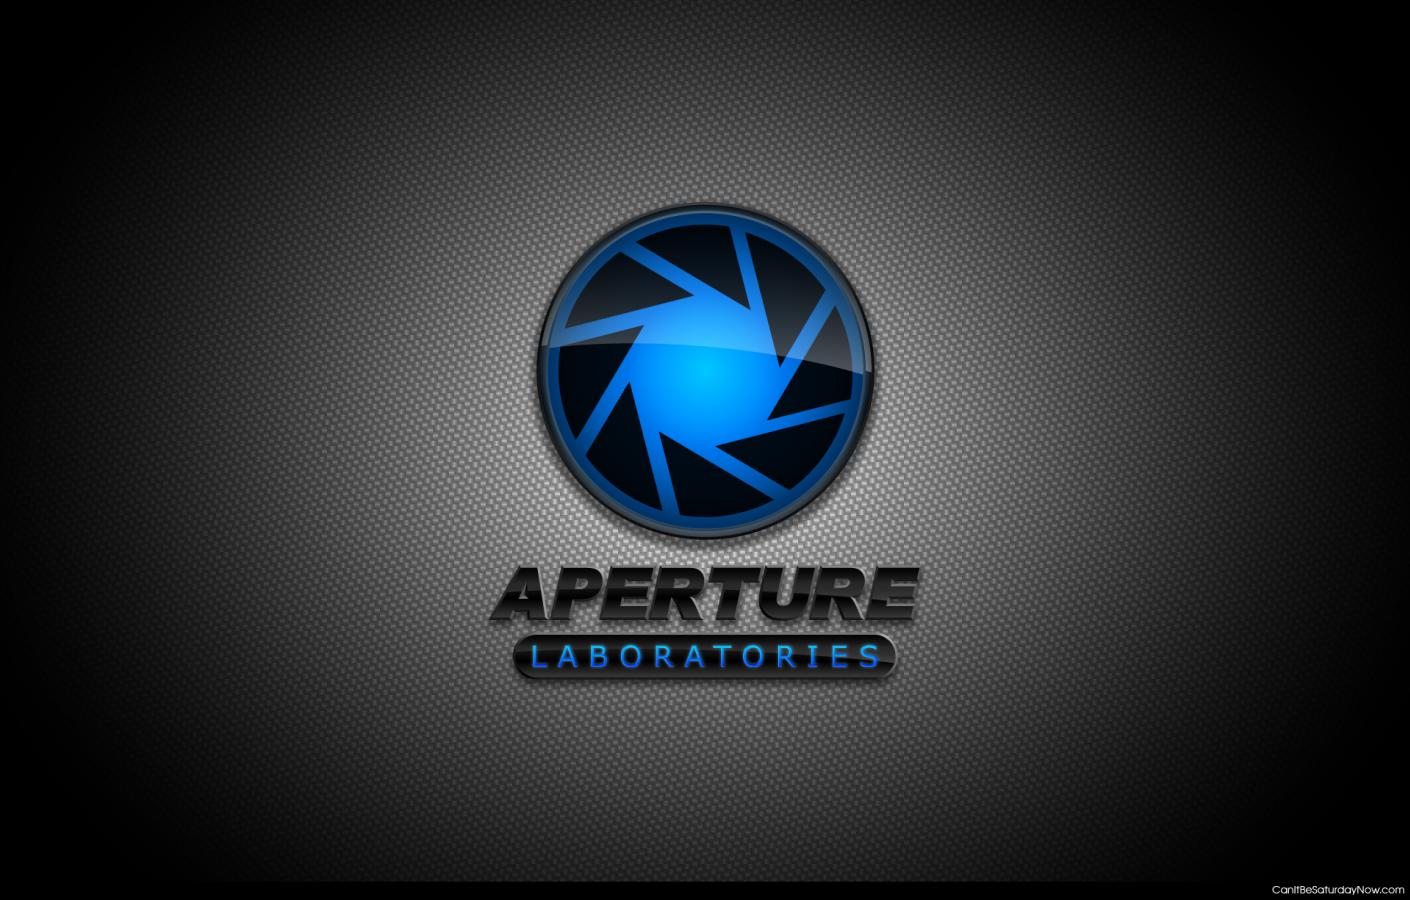 Aperture labs - Aperture Labs background